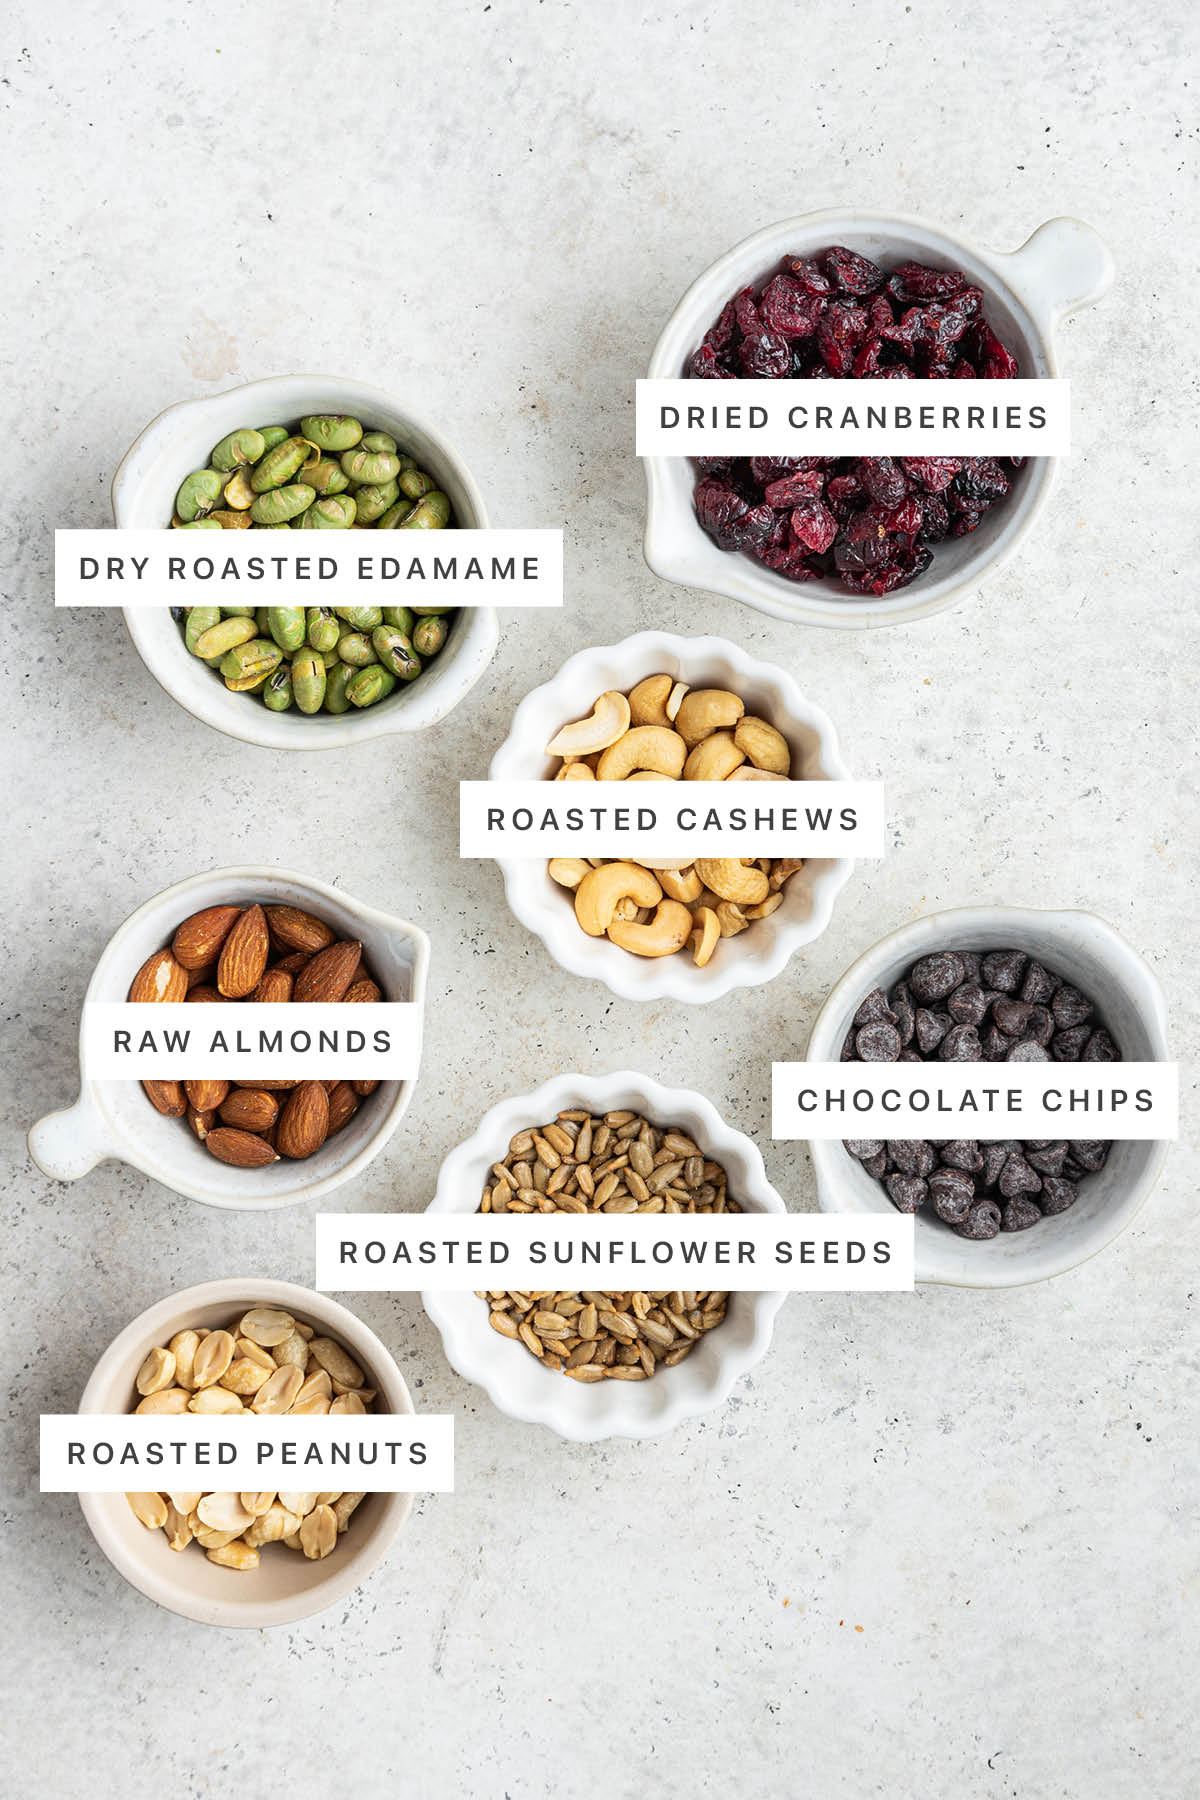 Ingredients measured out to make Protein Trail Mix: dry roasted edamame, dried cranberries, roasted cashews, raw almonds, chocolate chips, roasted sunflower seeds, roasted peanuts.